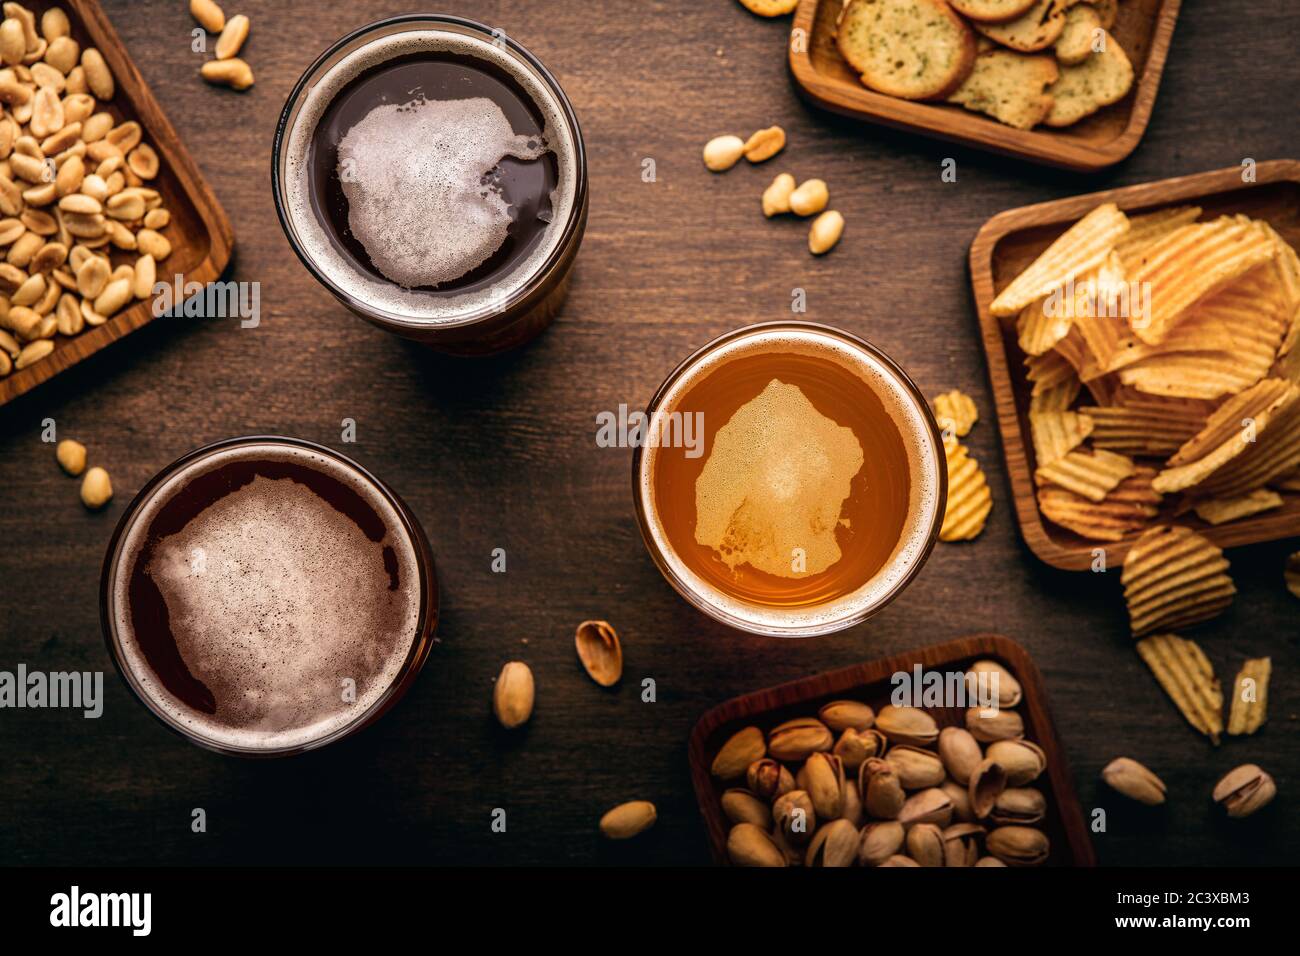 Different types of drink, chips, croutons and nuts in plates and scattered on table Stock Photo